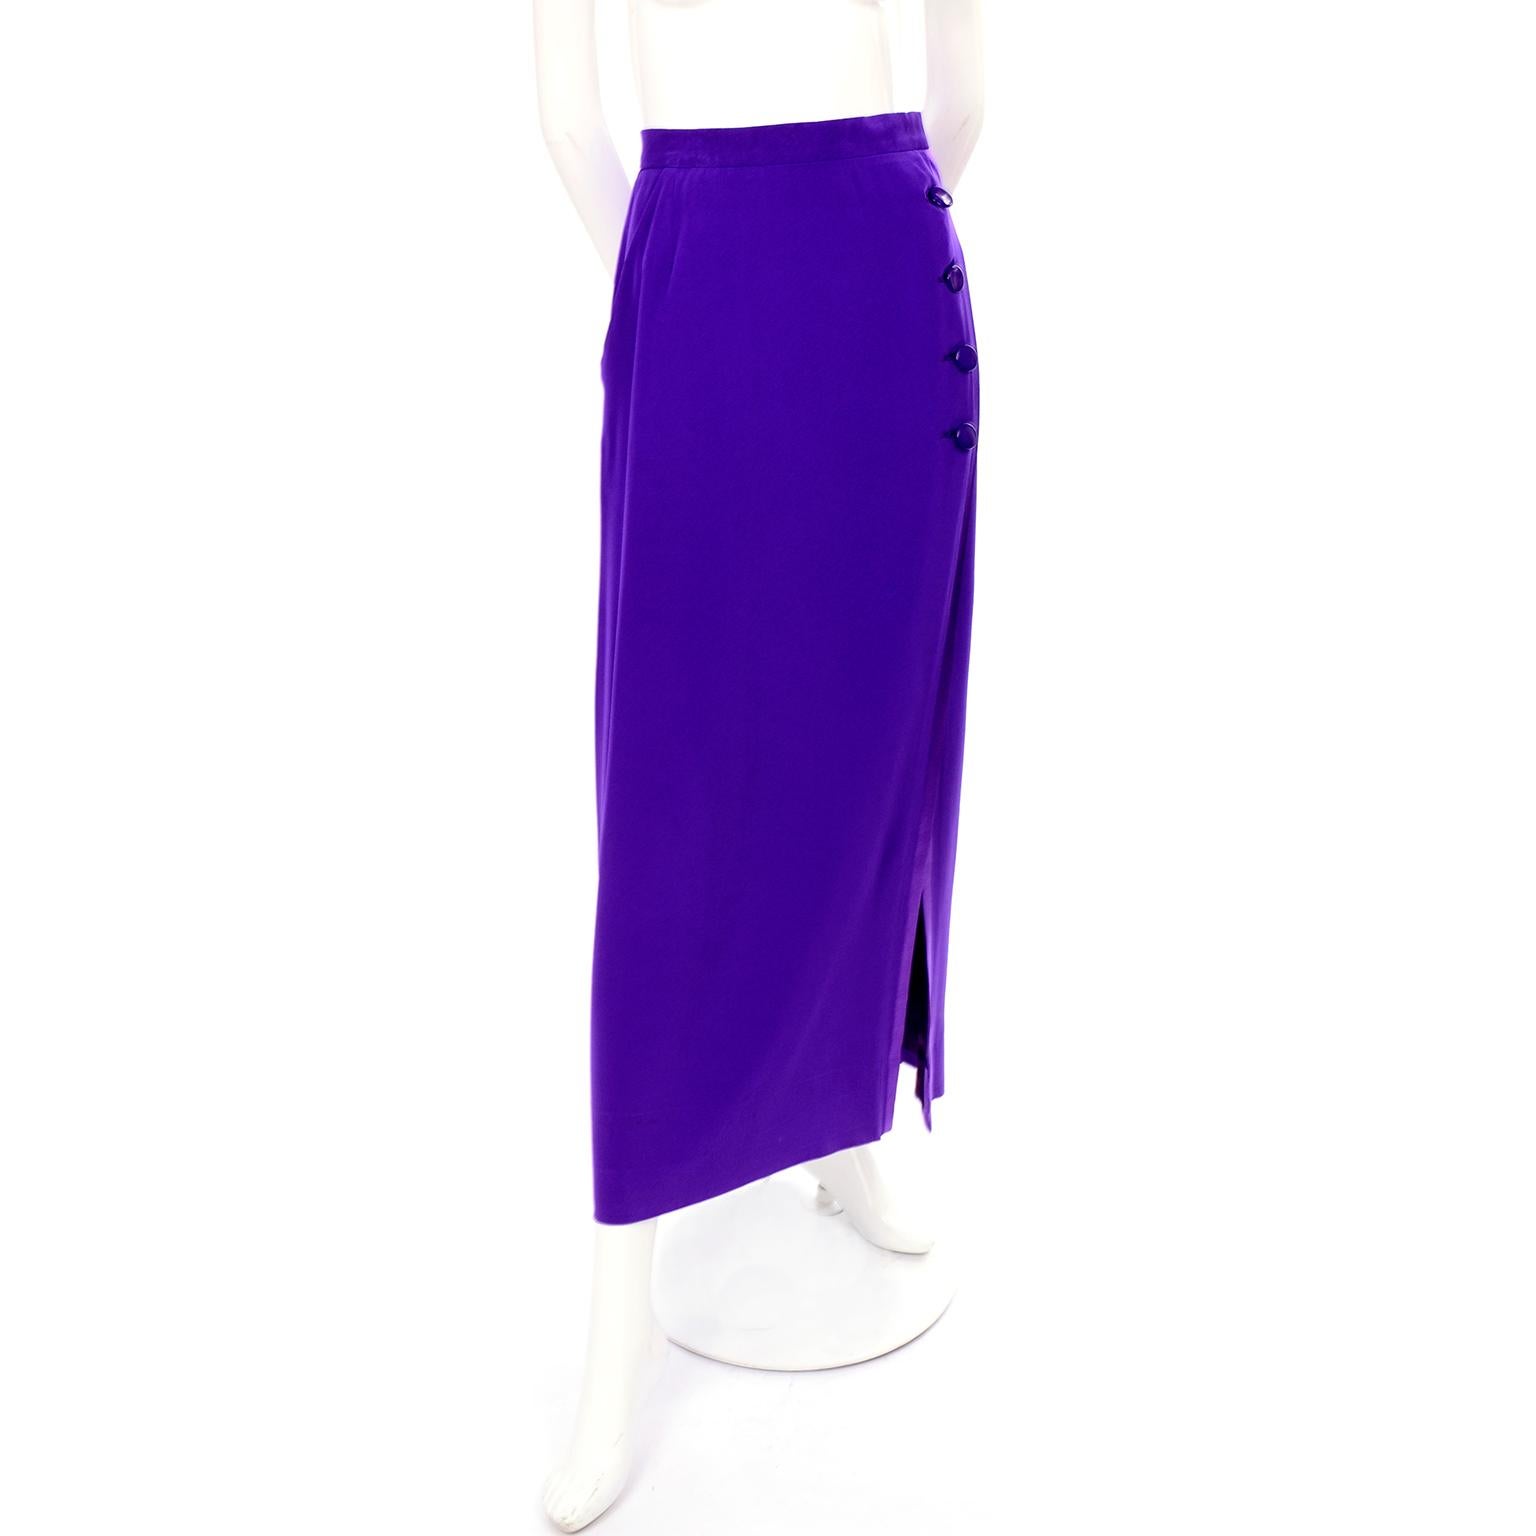 This is a wonderful Yves Saint Laurent Rive Gauche purple wool crepe skirt fully lined in dark purple satin. This lovely 1990's skirt has four purple button closures down the side, leading to a large open slit. It has one slit pocket on the right